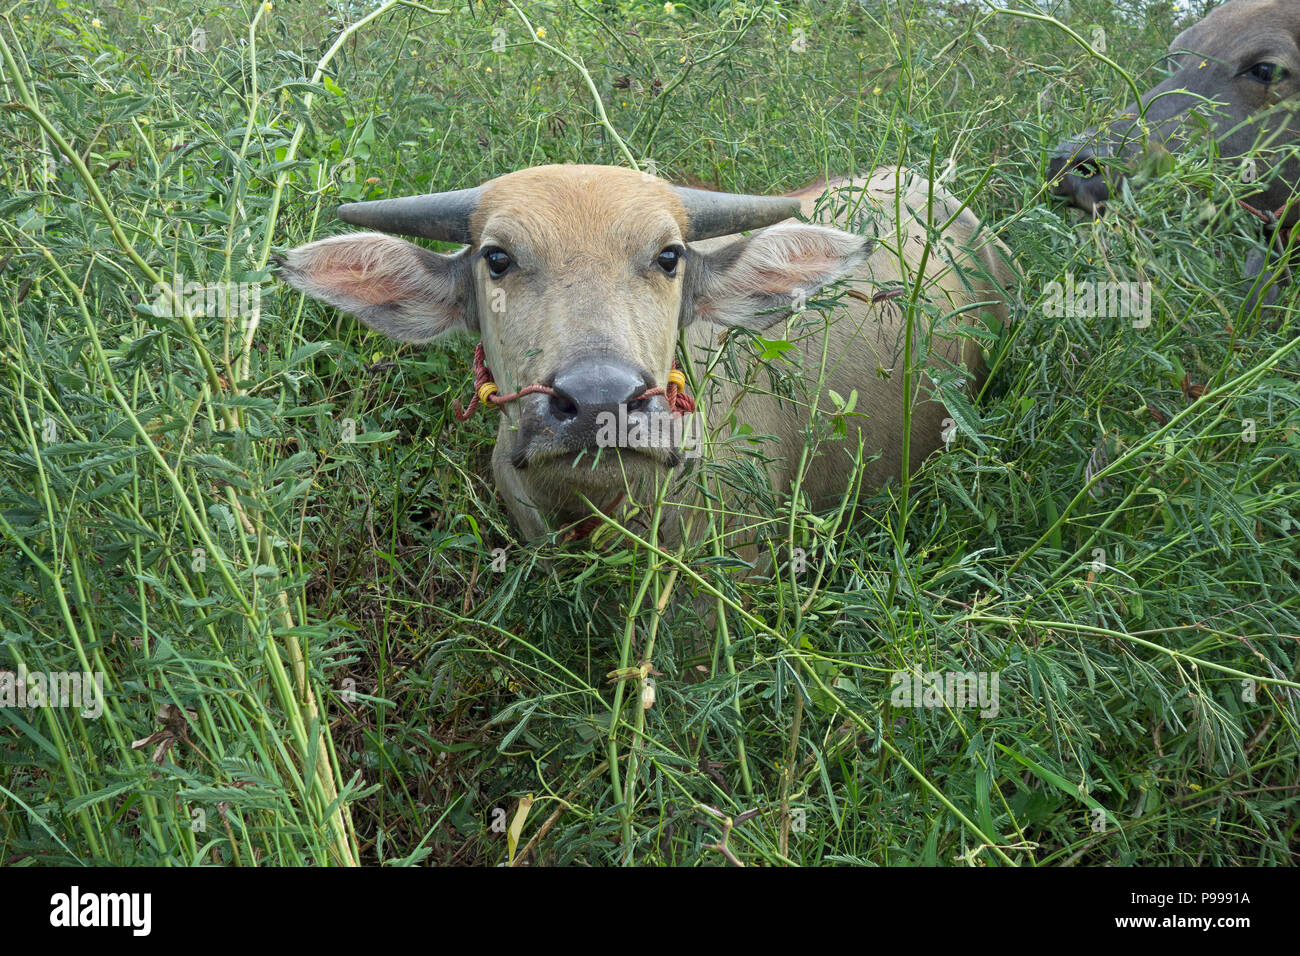 Asian Water Buffalo (Bubalus bubalis) standing in herbal foliage and wet ground in Udon Thani, Isaan, Thailand Stock Photo